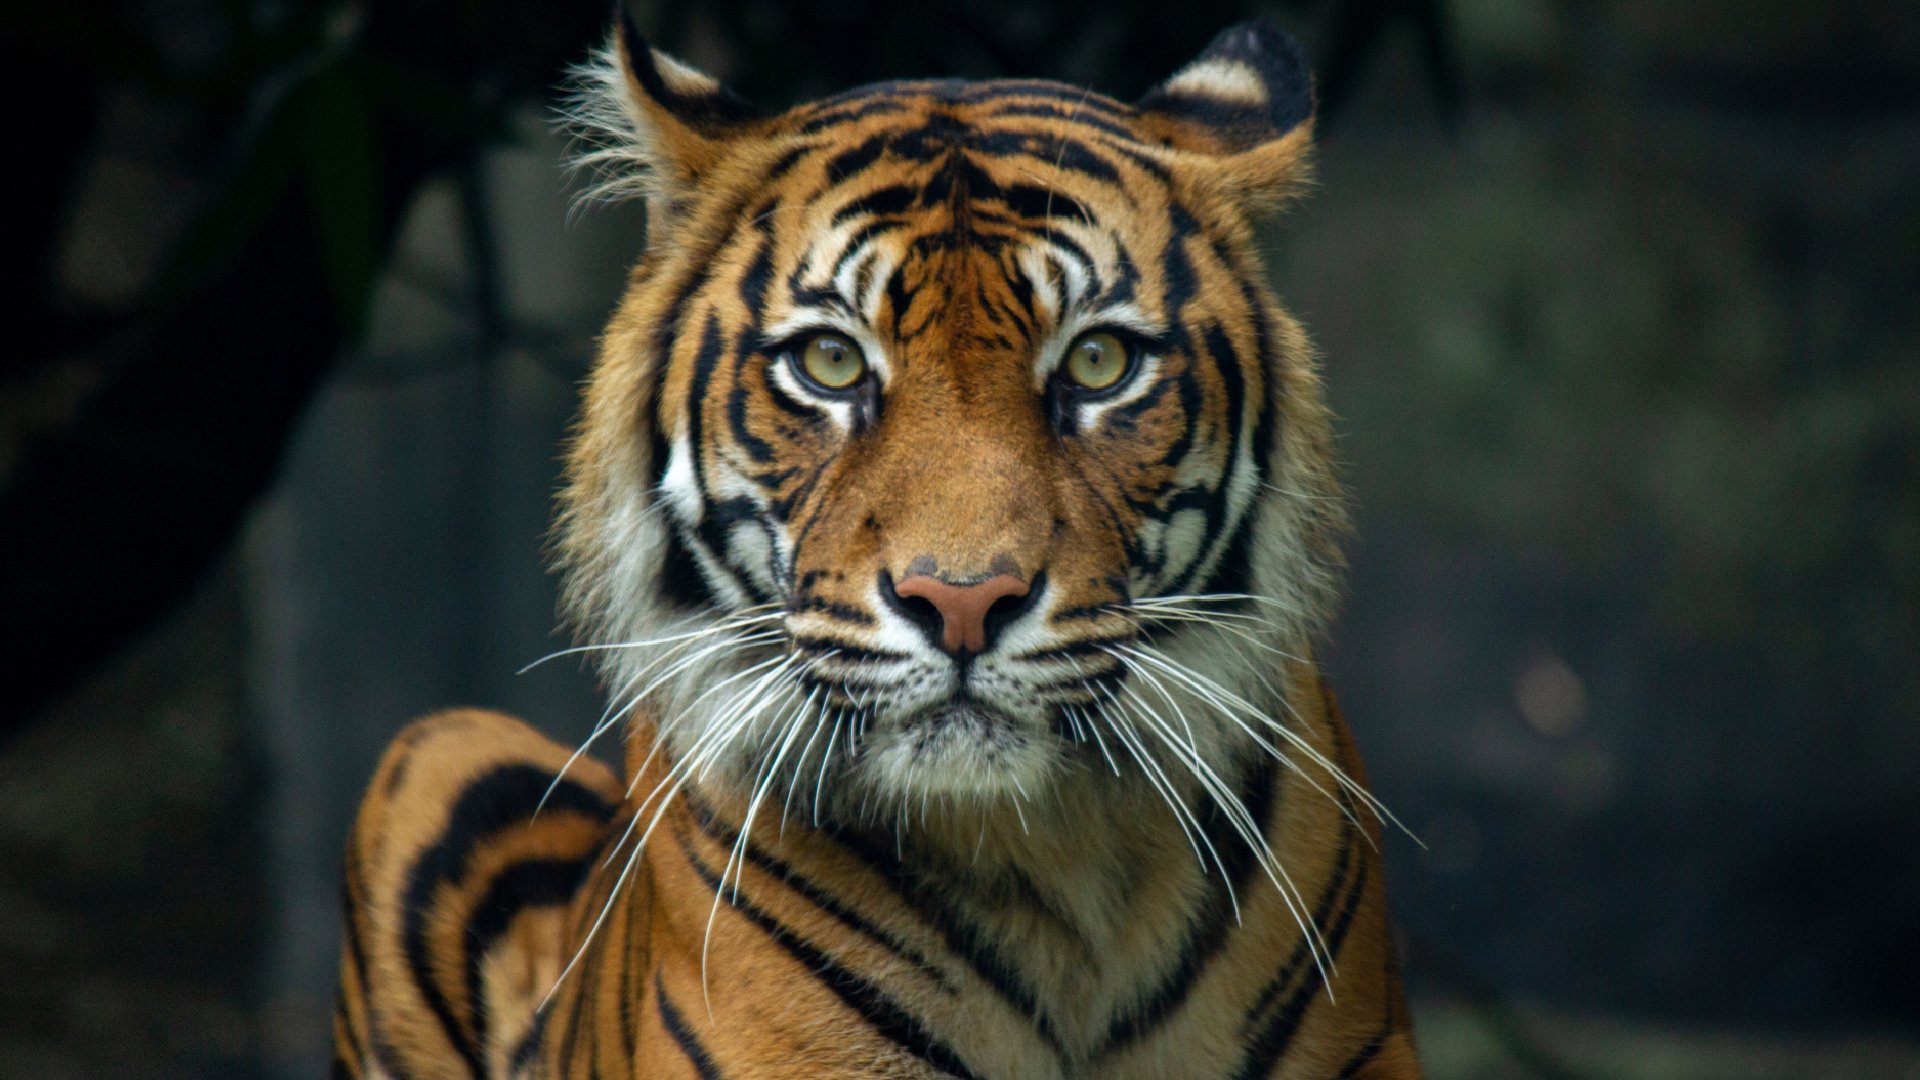 A tiger stares into the camera. It’s orange and white with striking black stripes. The background is dark and out of focus to make anything out.